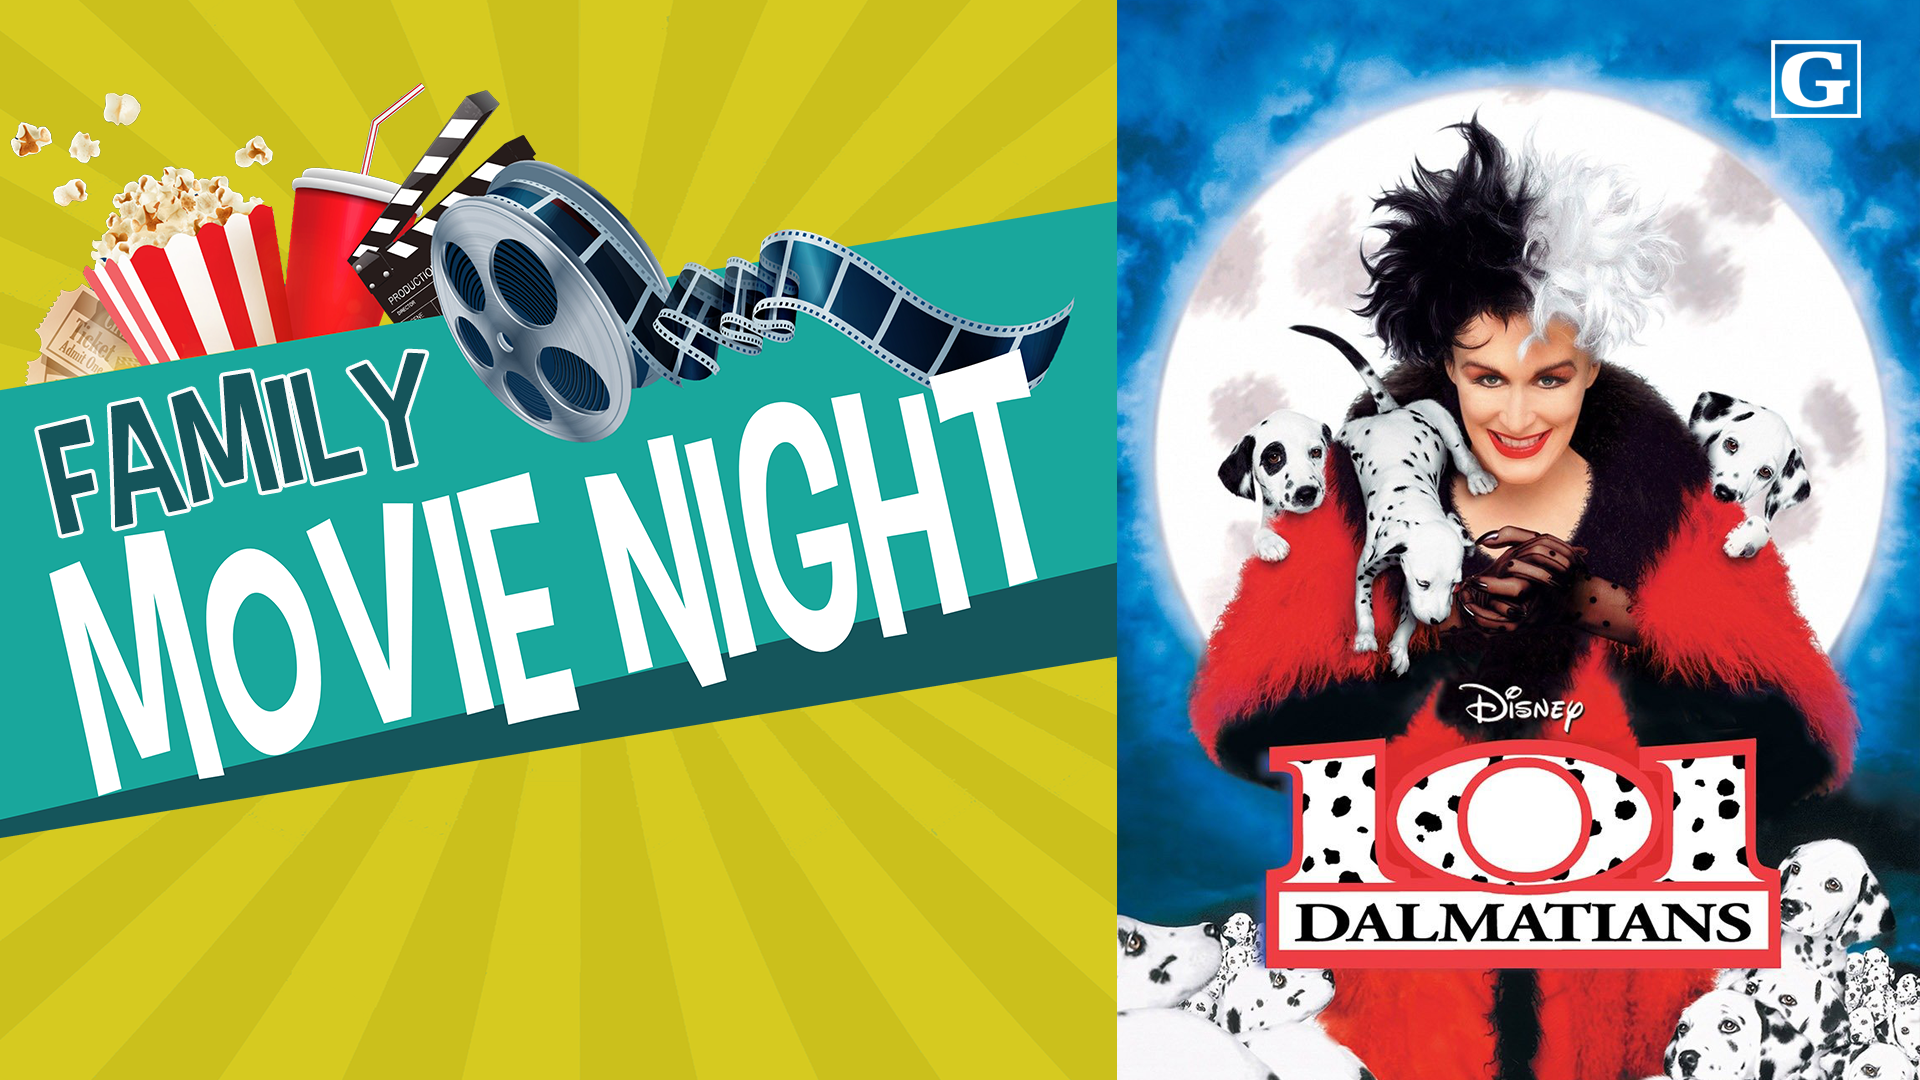 Image reads "Family Movie Night" against a dark yellow sunburst background. A bucket of popcorn, a cup, and a movie reel are above the title. On the right side of the image, text reads "101 Dalmations" and shows a villainous looking-woman with white and black hair and wearing a red and black coat standing in front of a night sky with a huge white full moon. She is surrounding by white and black-spotted puppies.